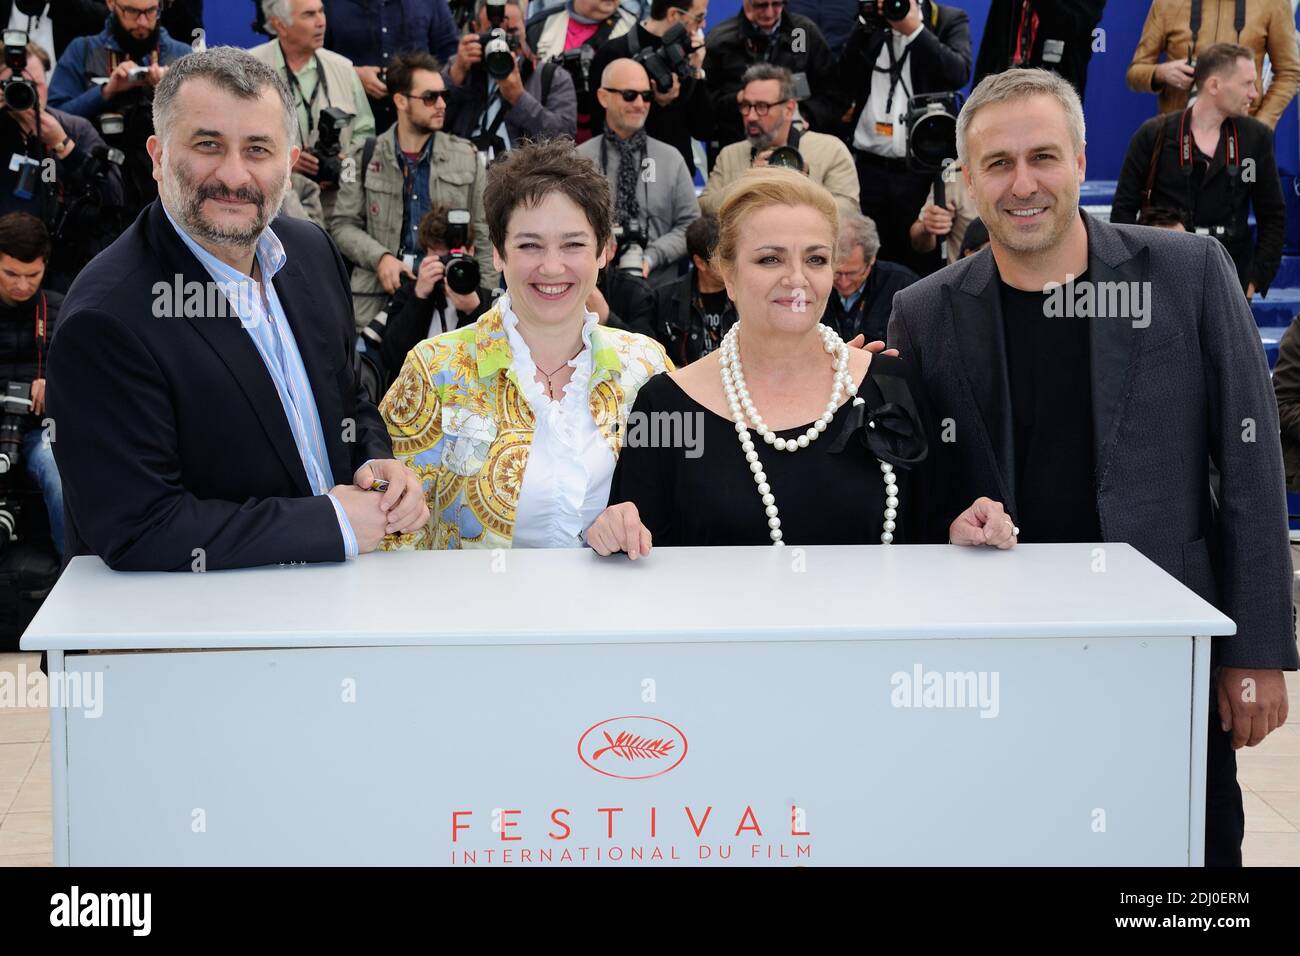 Cristi Puiu, Anca Puiu, Dana Dogaru and Mimi Branescu attending the 'Sieranevada' Photocall at the Palais Des Festivals in Cannes, France on May 12, 2016, as part of the 69th Cannes Film Festival. Photo by Aurore Marechal/ABACAPRESS.COM Stock Photo